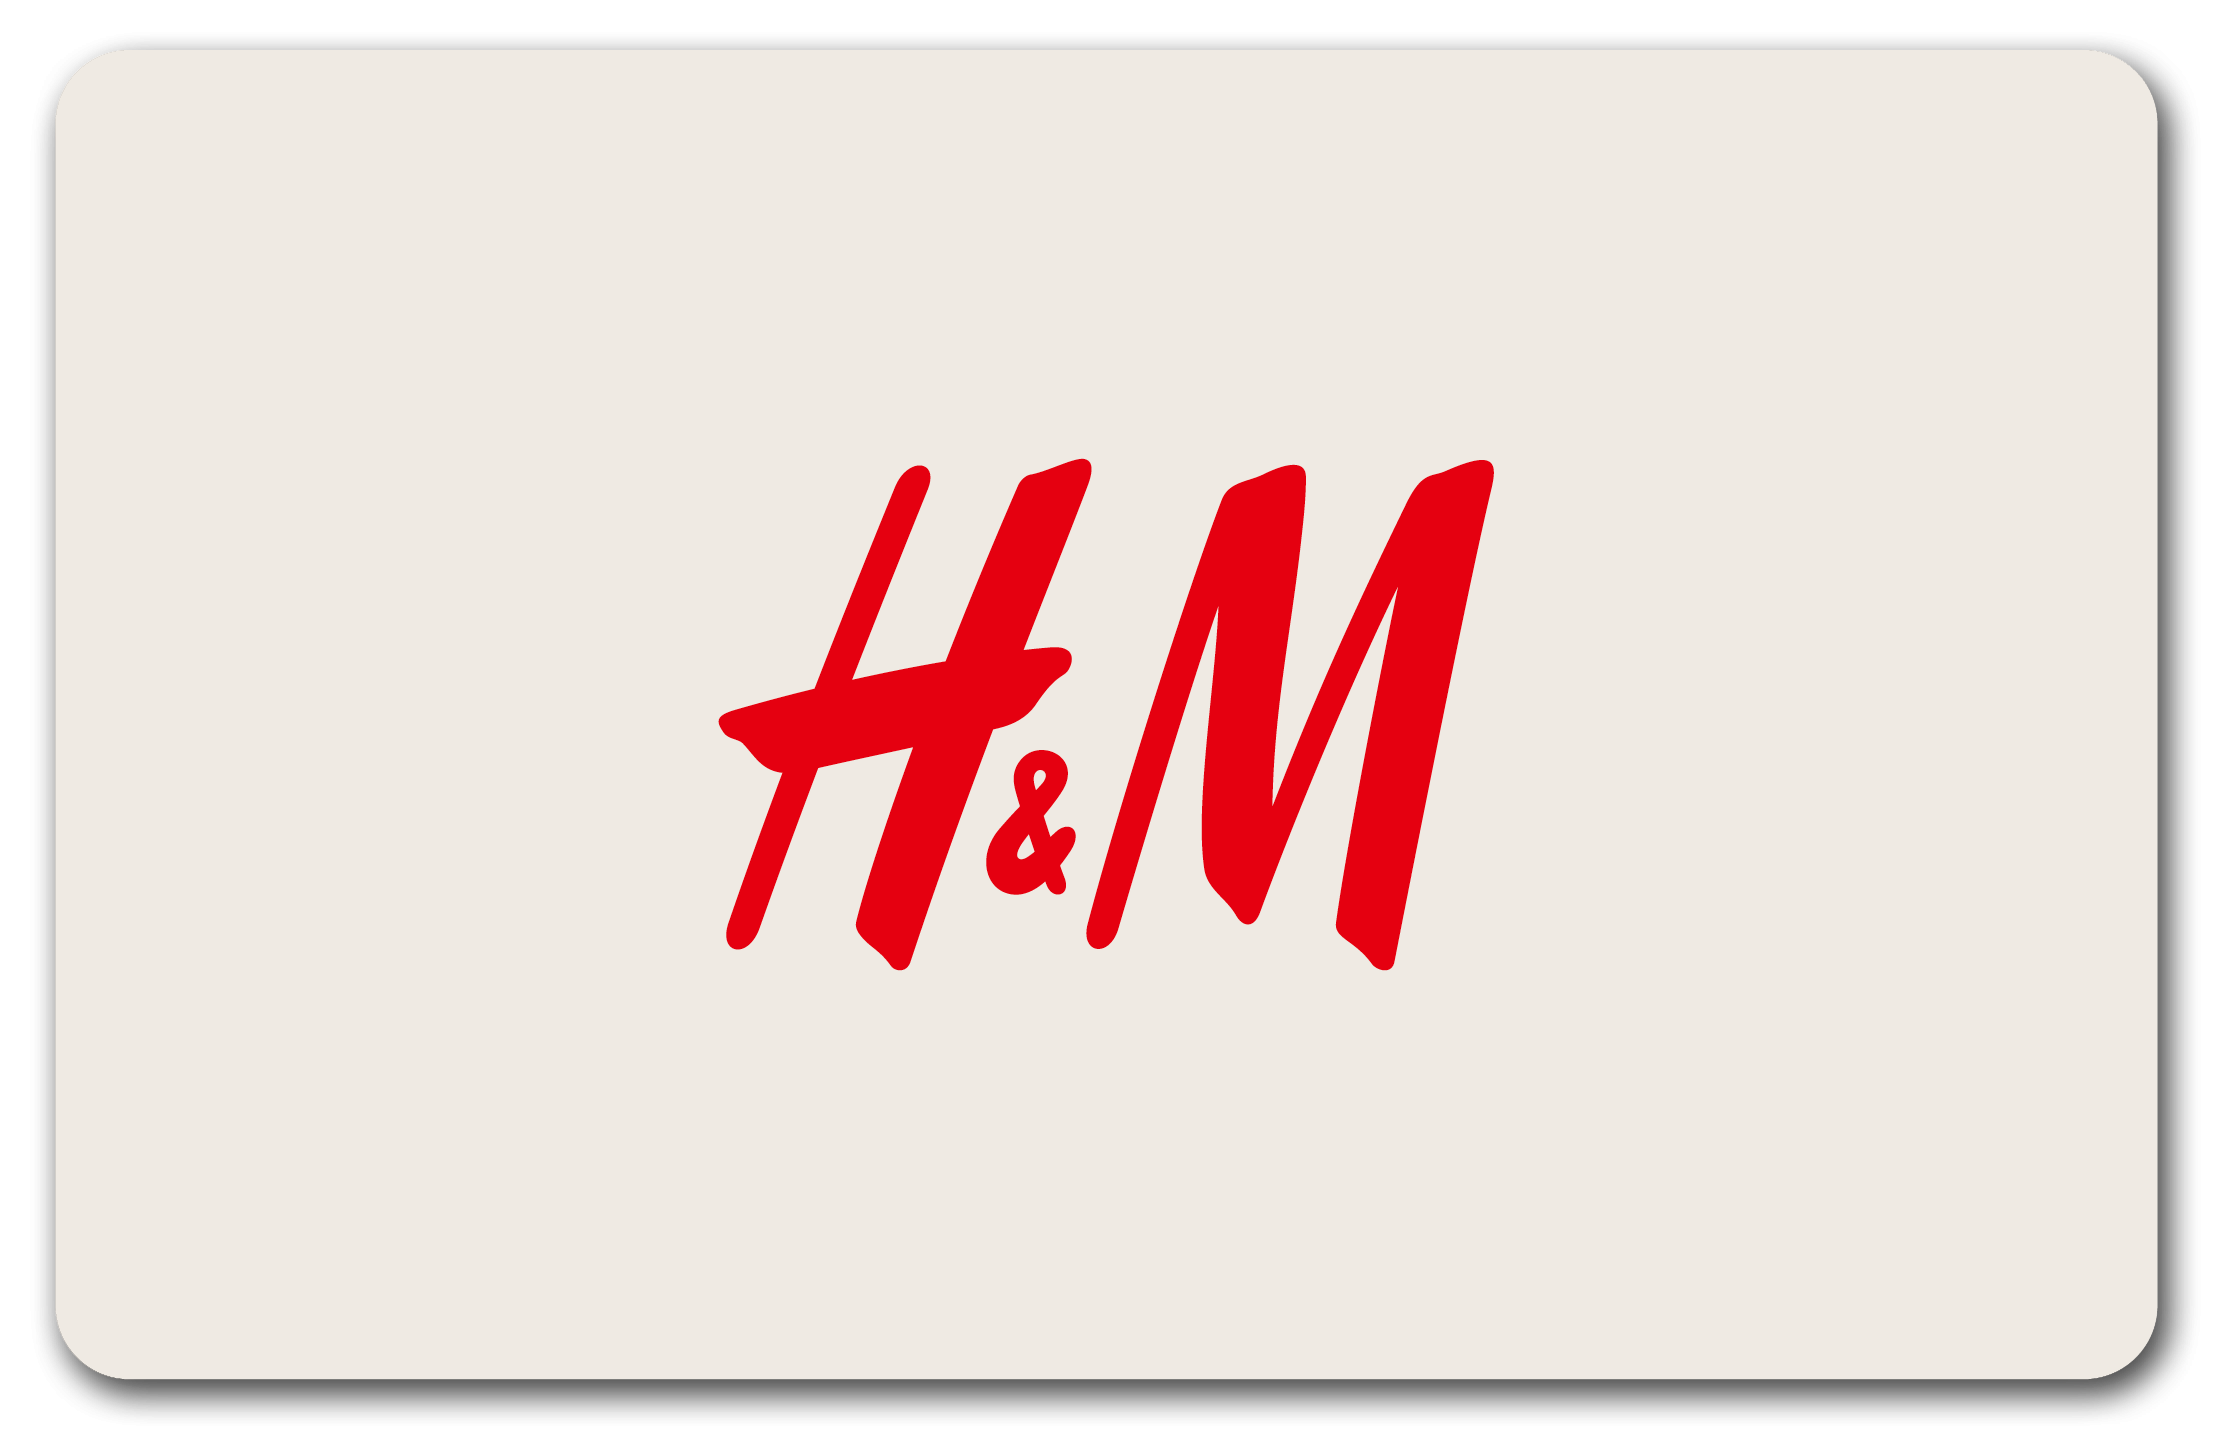 H&M Poitiers